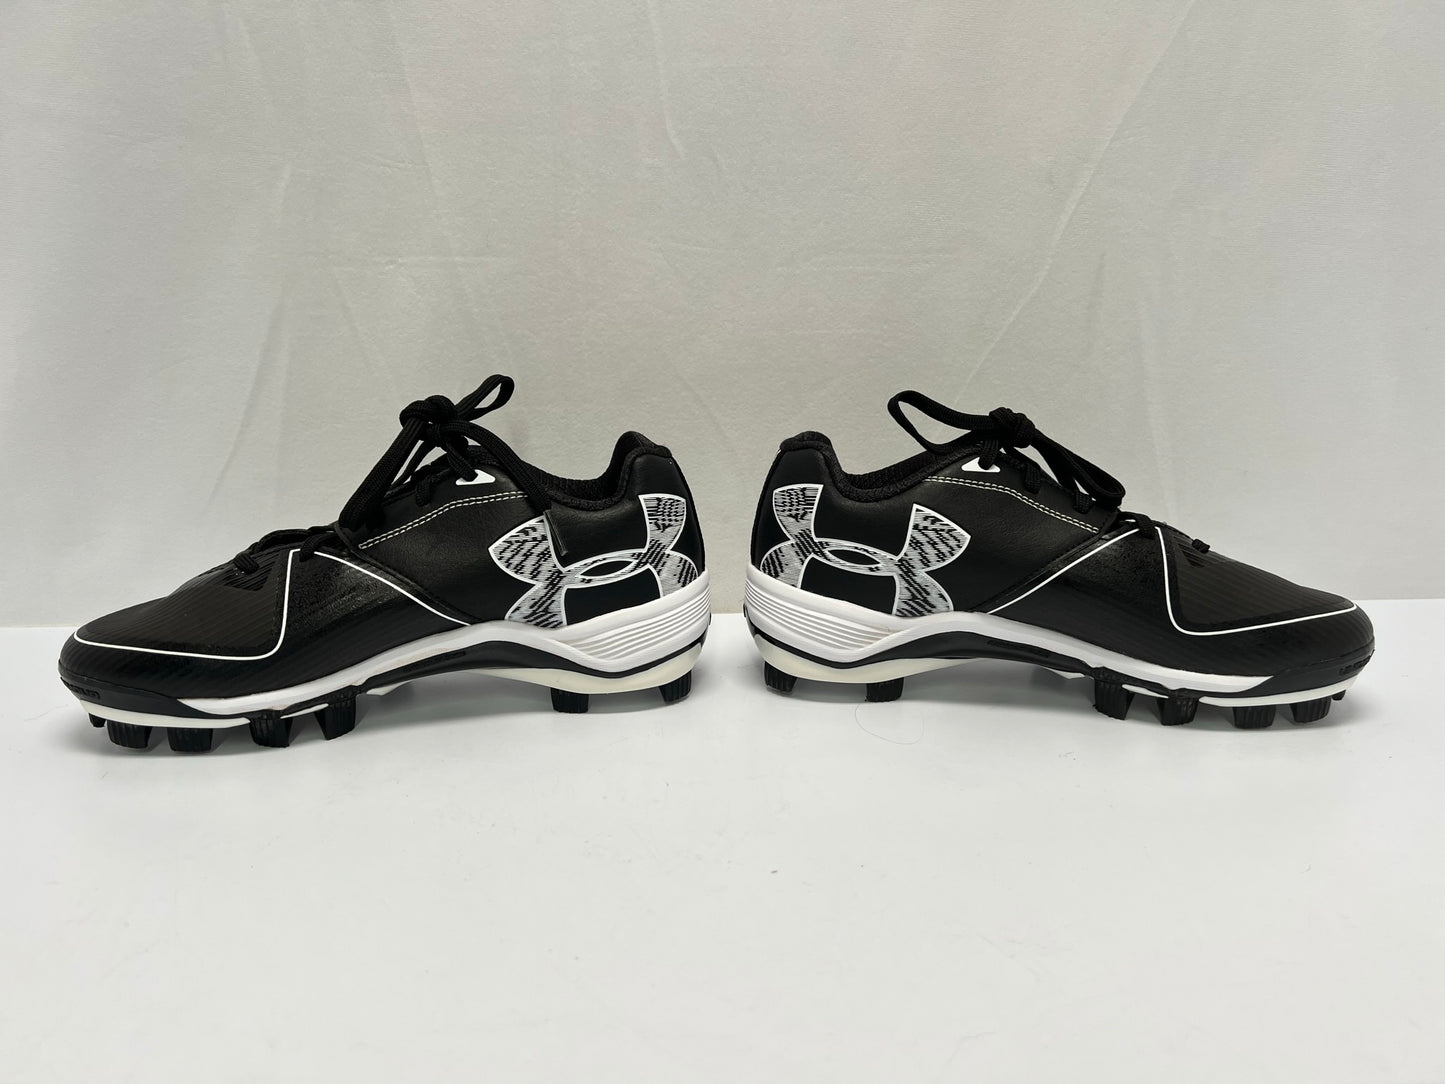 Baseball Shoes Cleats Men's Size 7.5 Under Armour Black White As New